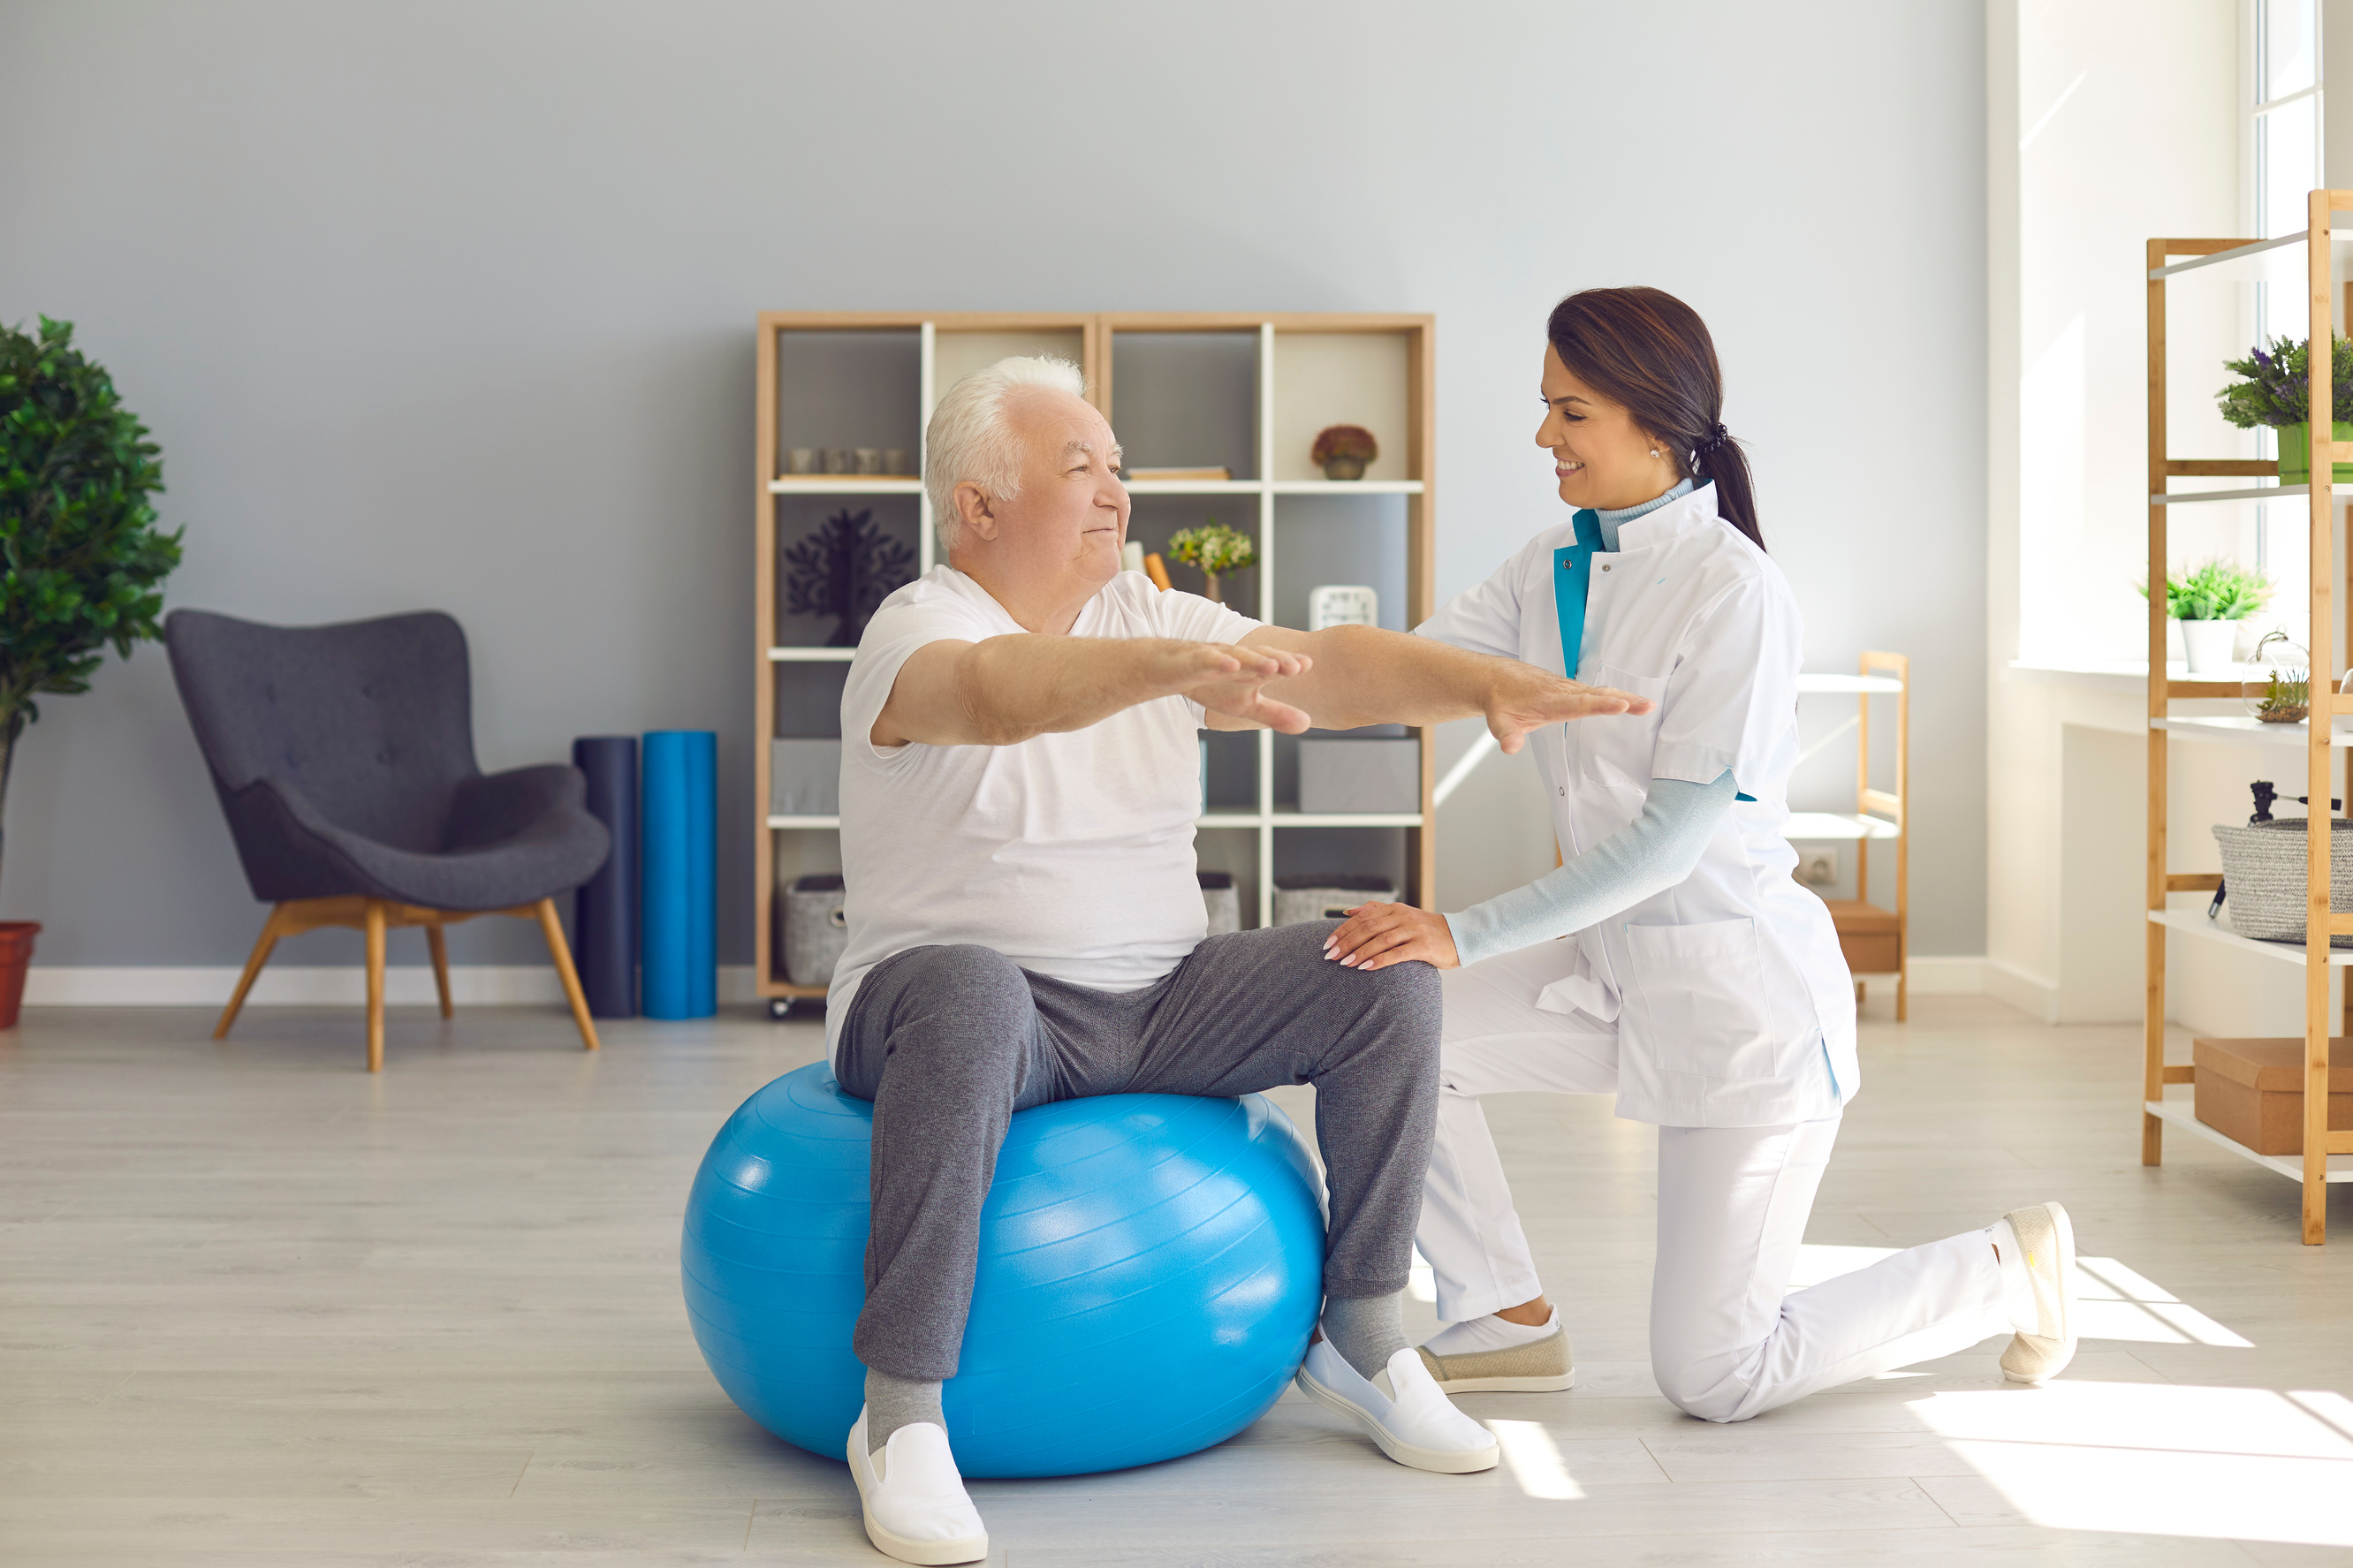 Smiling Woman Chiropractor Correcting Old Man Movements during Rehabilitation Theapy on Fitness Ball